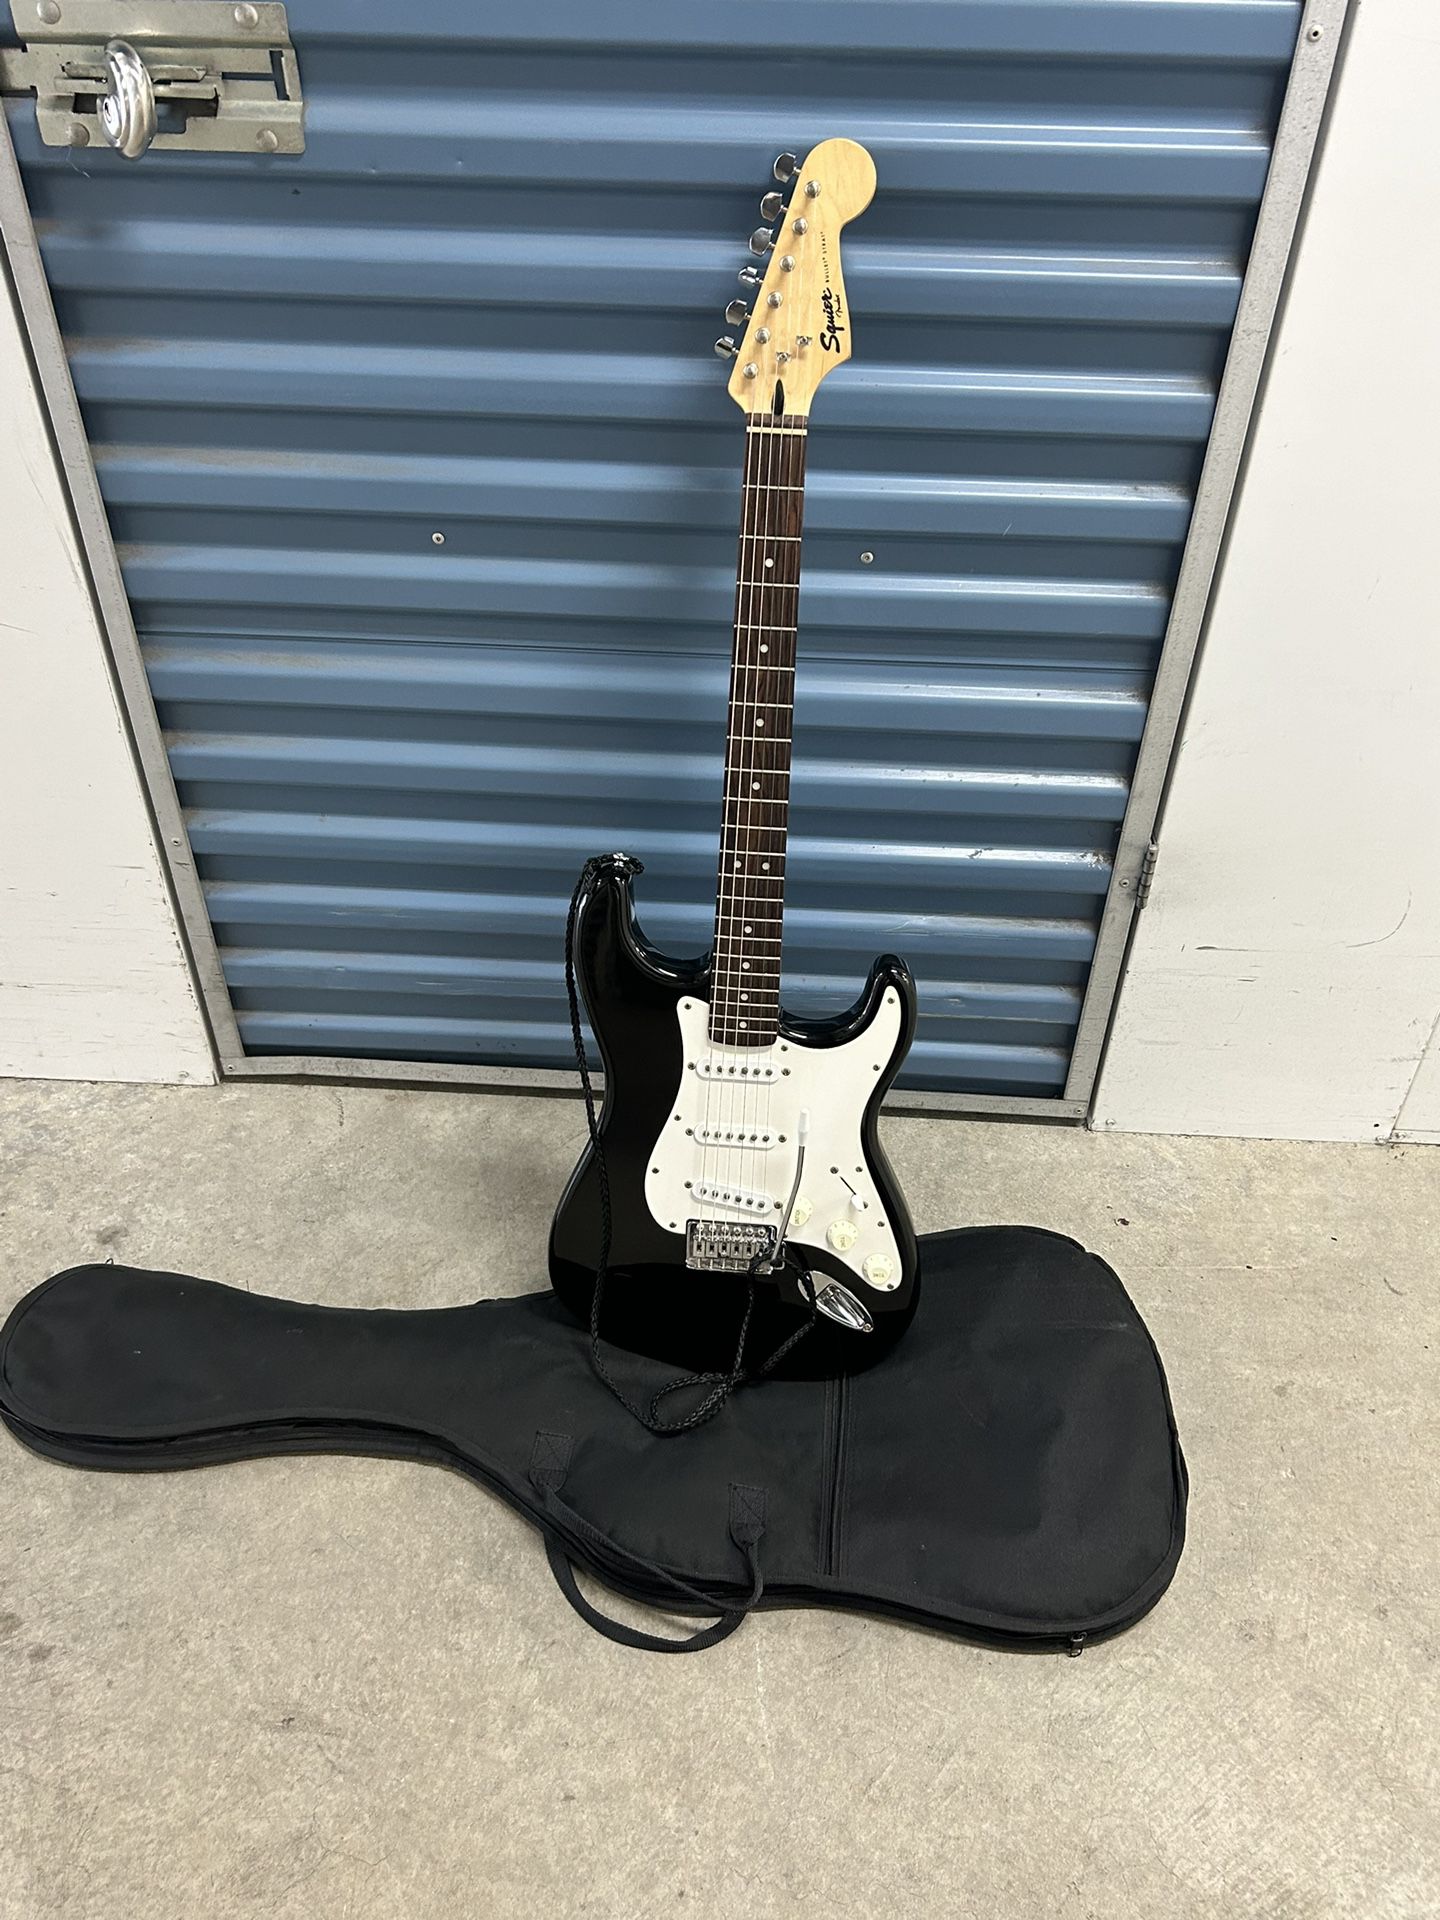 Fender Squier Strat Right Handed Black & White Electric Guitar With Soft Gig Bag